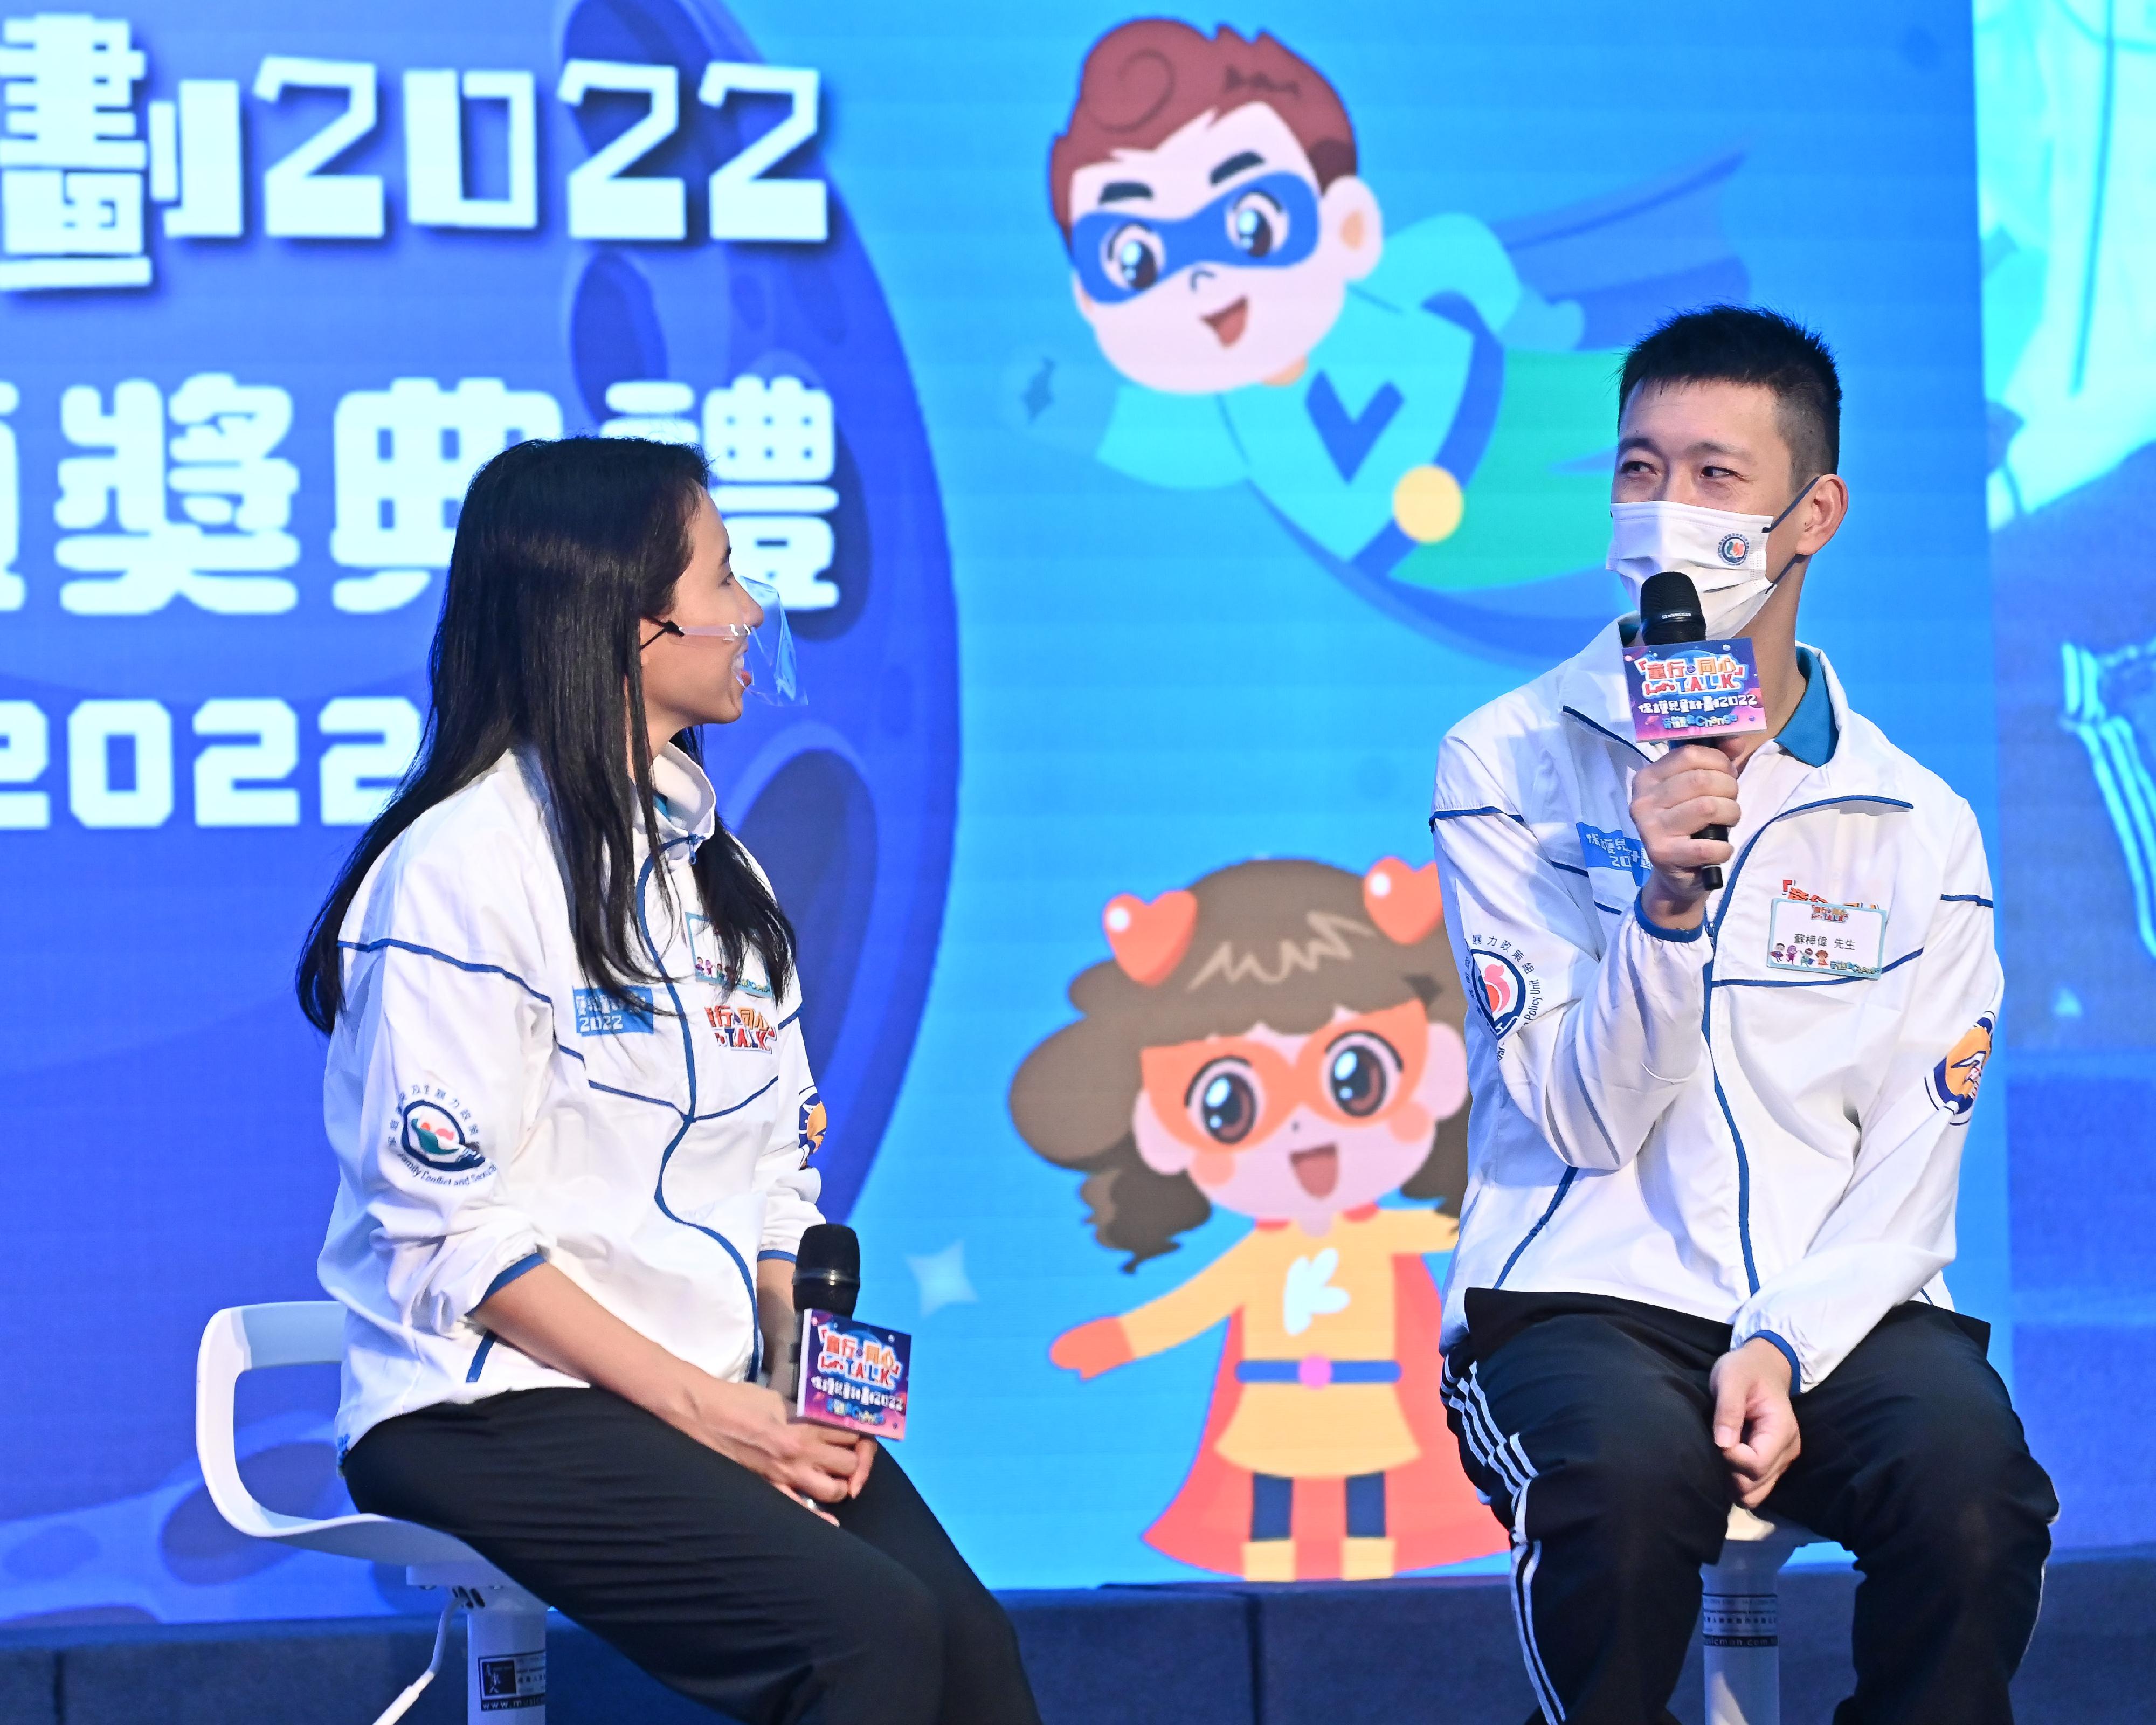 The Hong Kong Police Force held the Closing cum Award Presentation Ceremony for the "Let’s T.A.L.K. – Child Protection Campaign 2022" today (November 20). Photo shows the representative of the Hong Kong Paralympic Committee, Mr So Wa-wai (right), sharing his challenges in life while growing up.